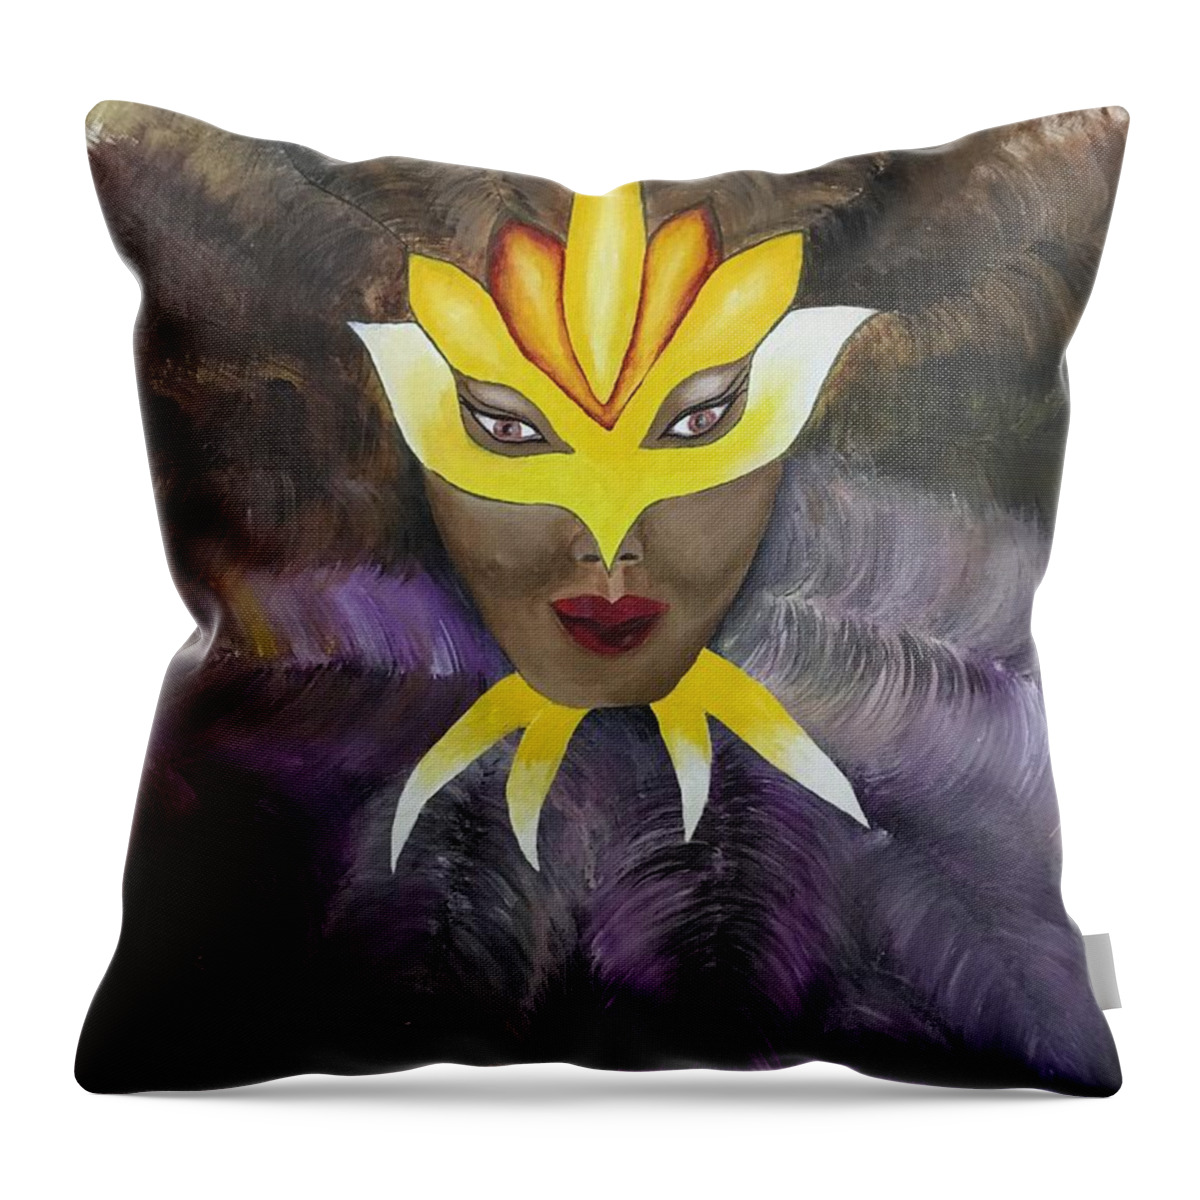  Throw Pillow featuring the painting Masquerade by Pamela Henry